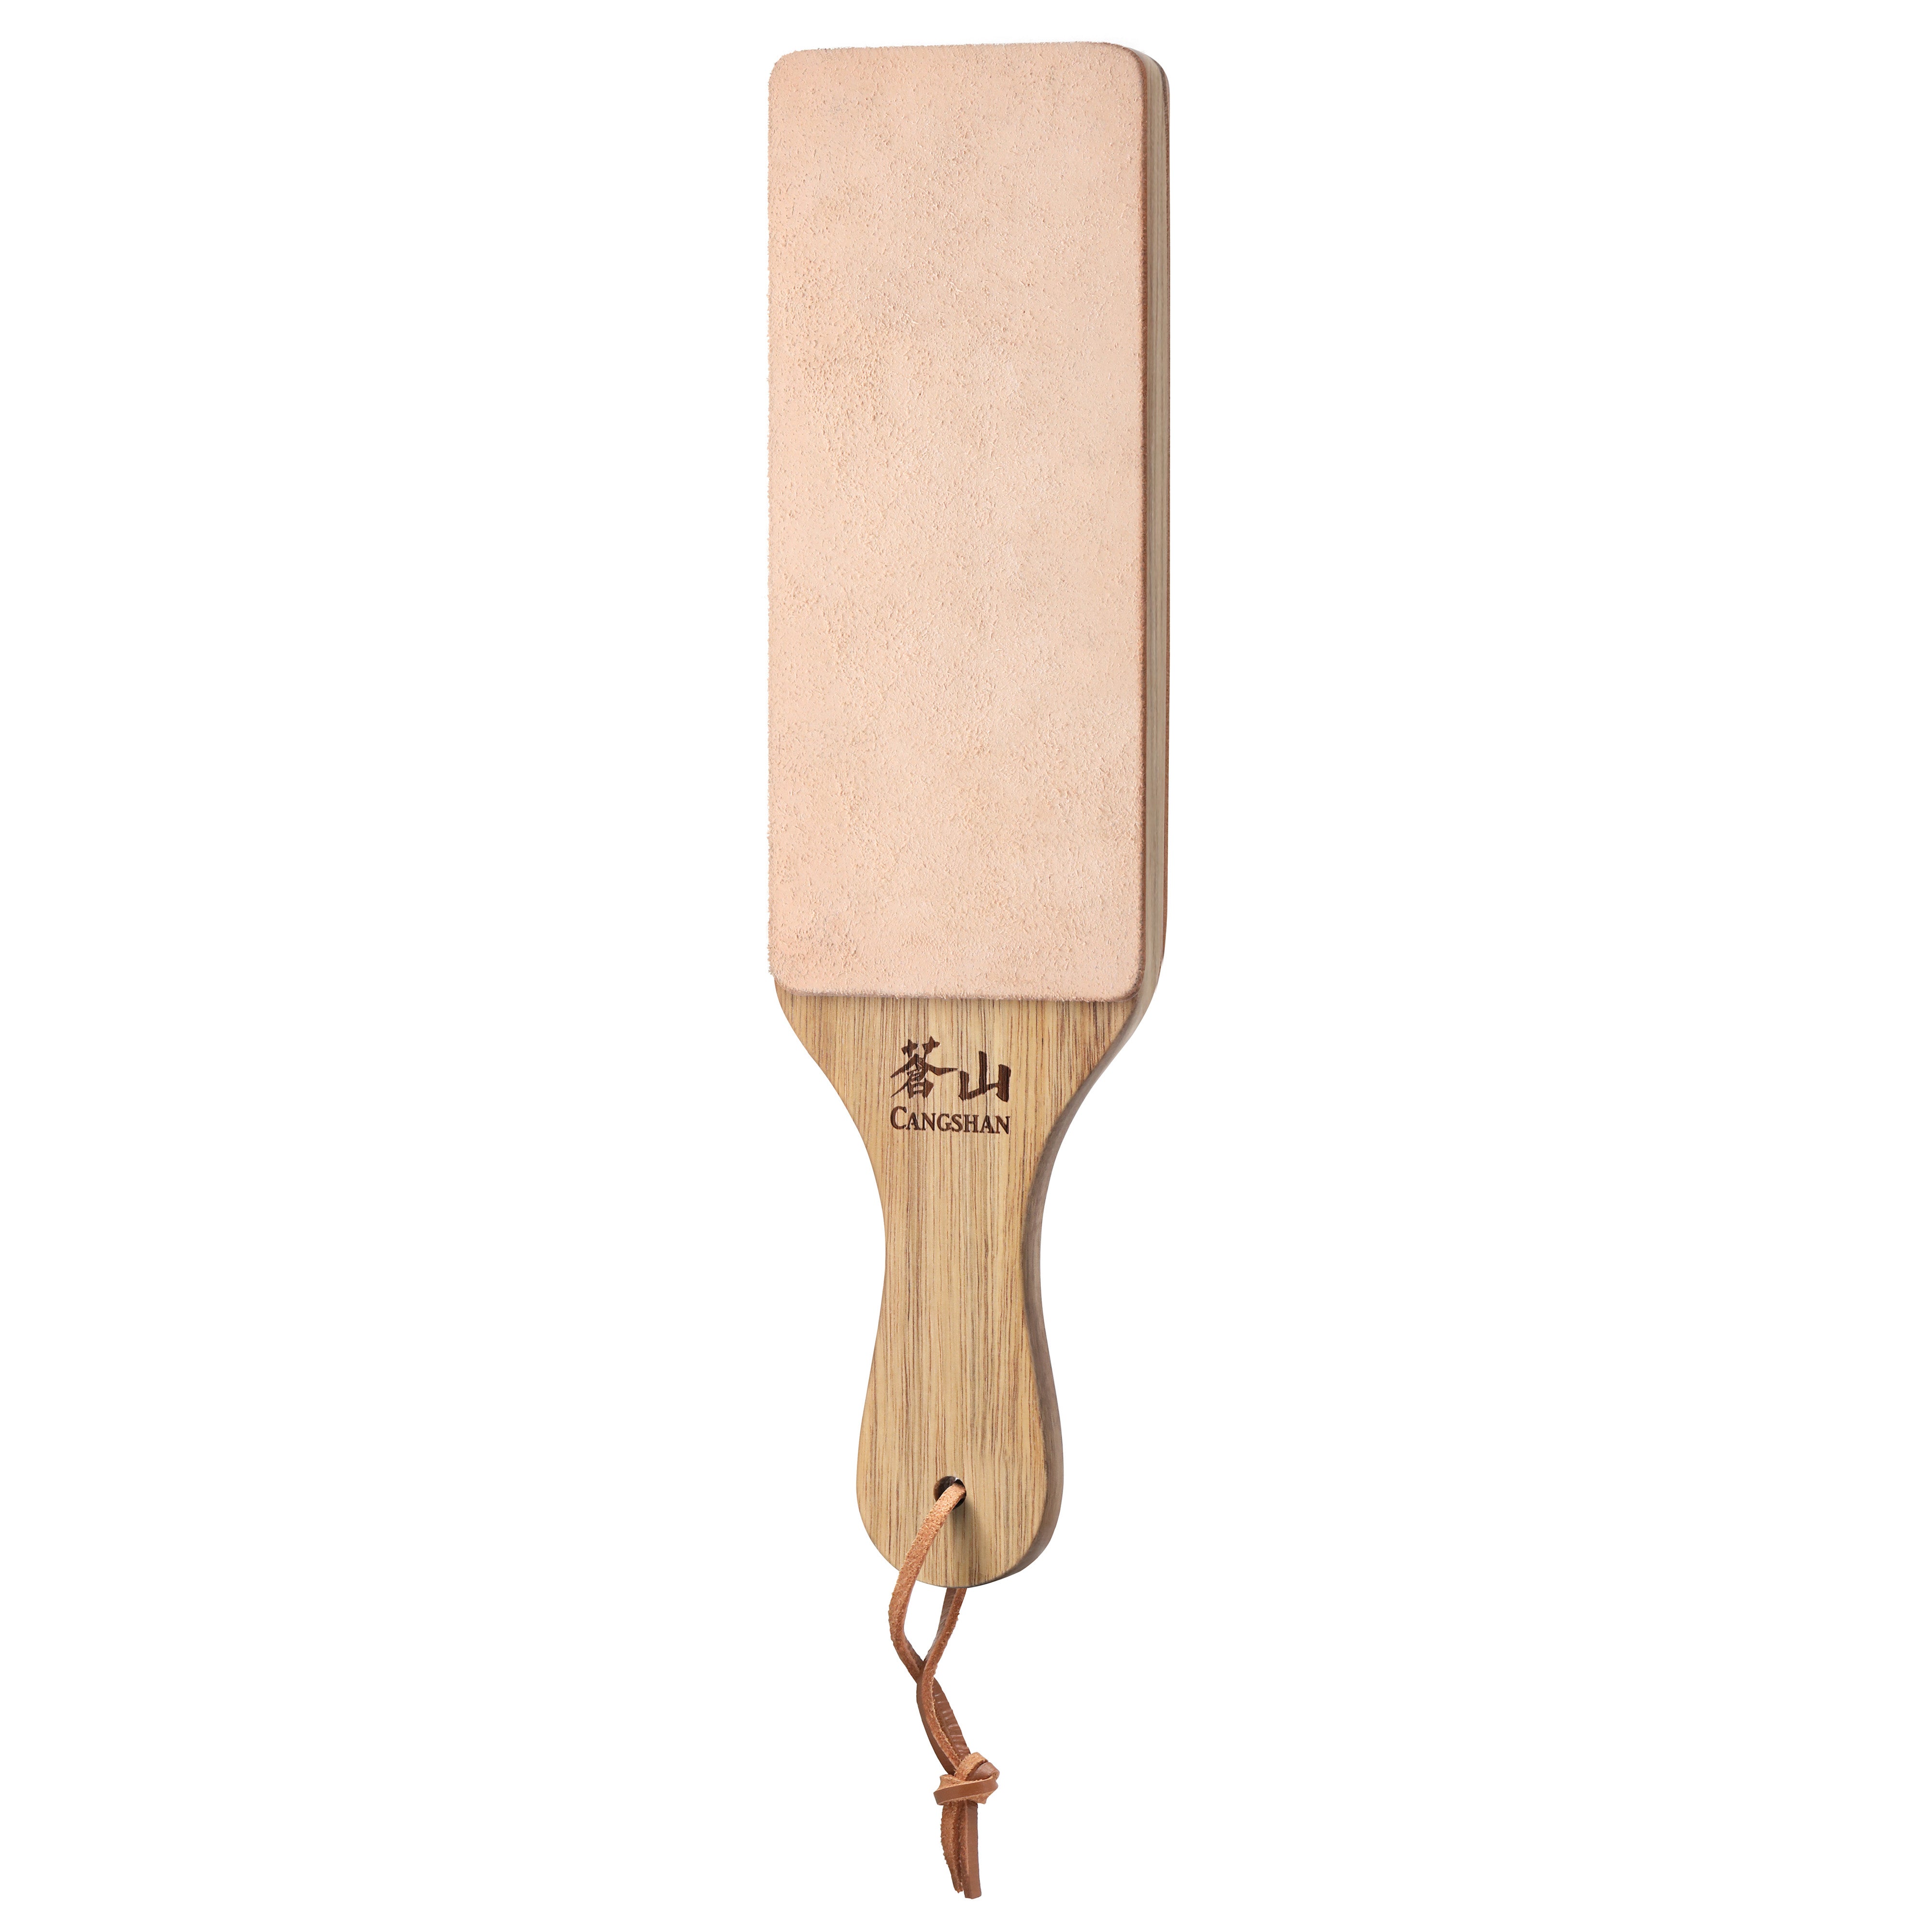 LEATHER PADDLE STROP by Tokushu Knife- The Perfect Size For Your Knife Roll!